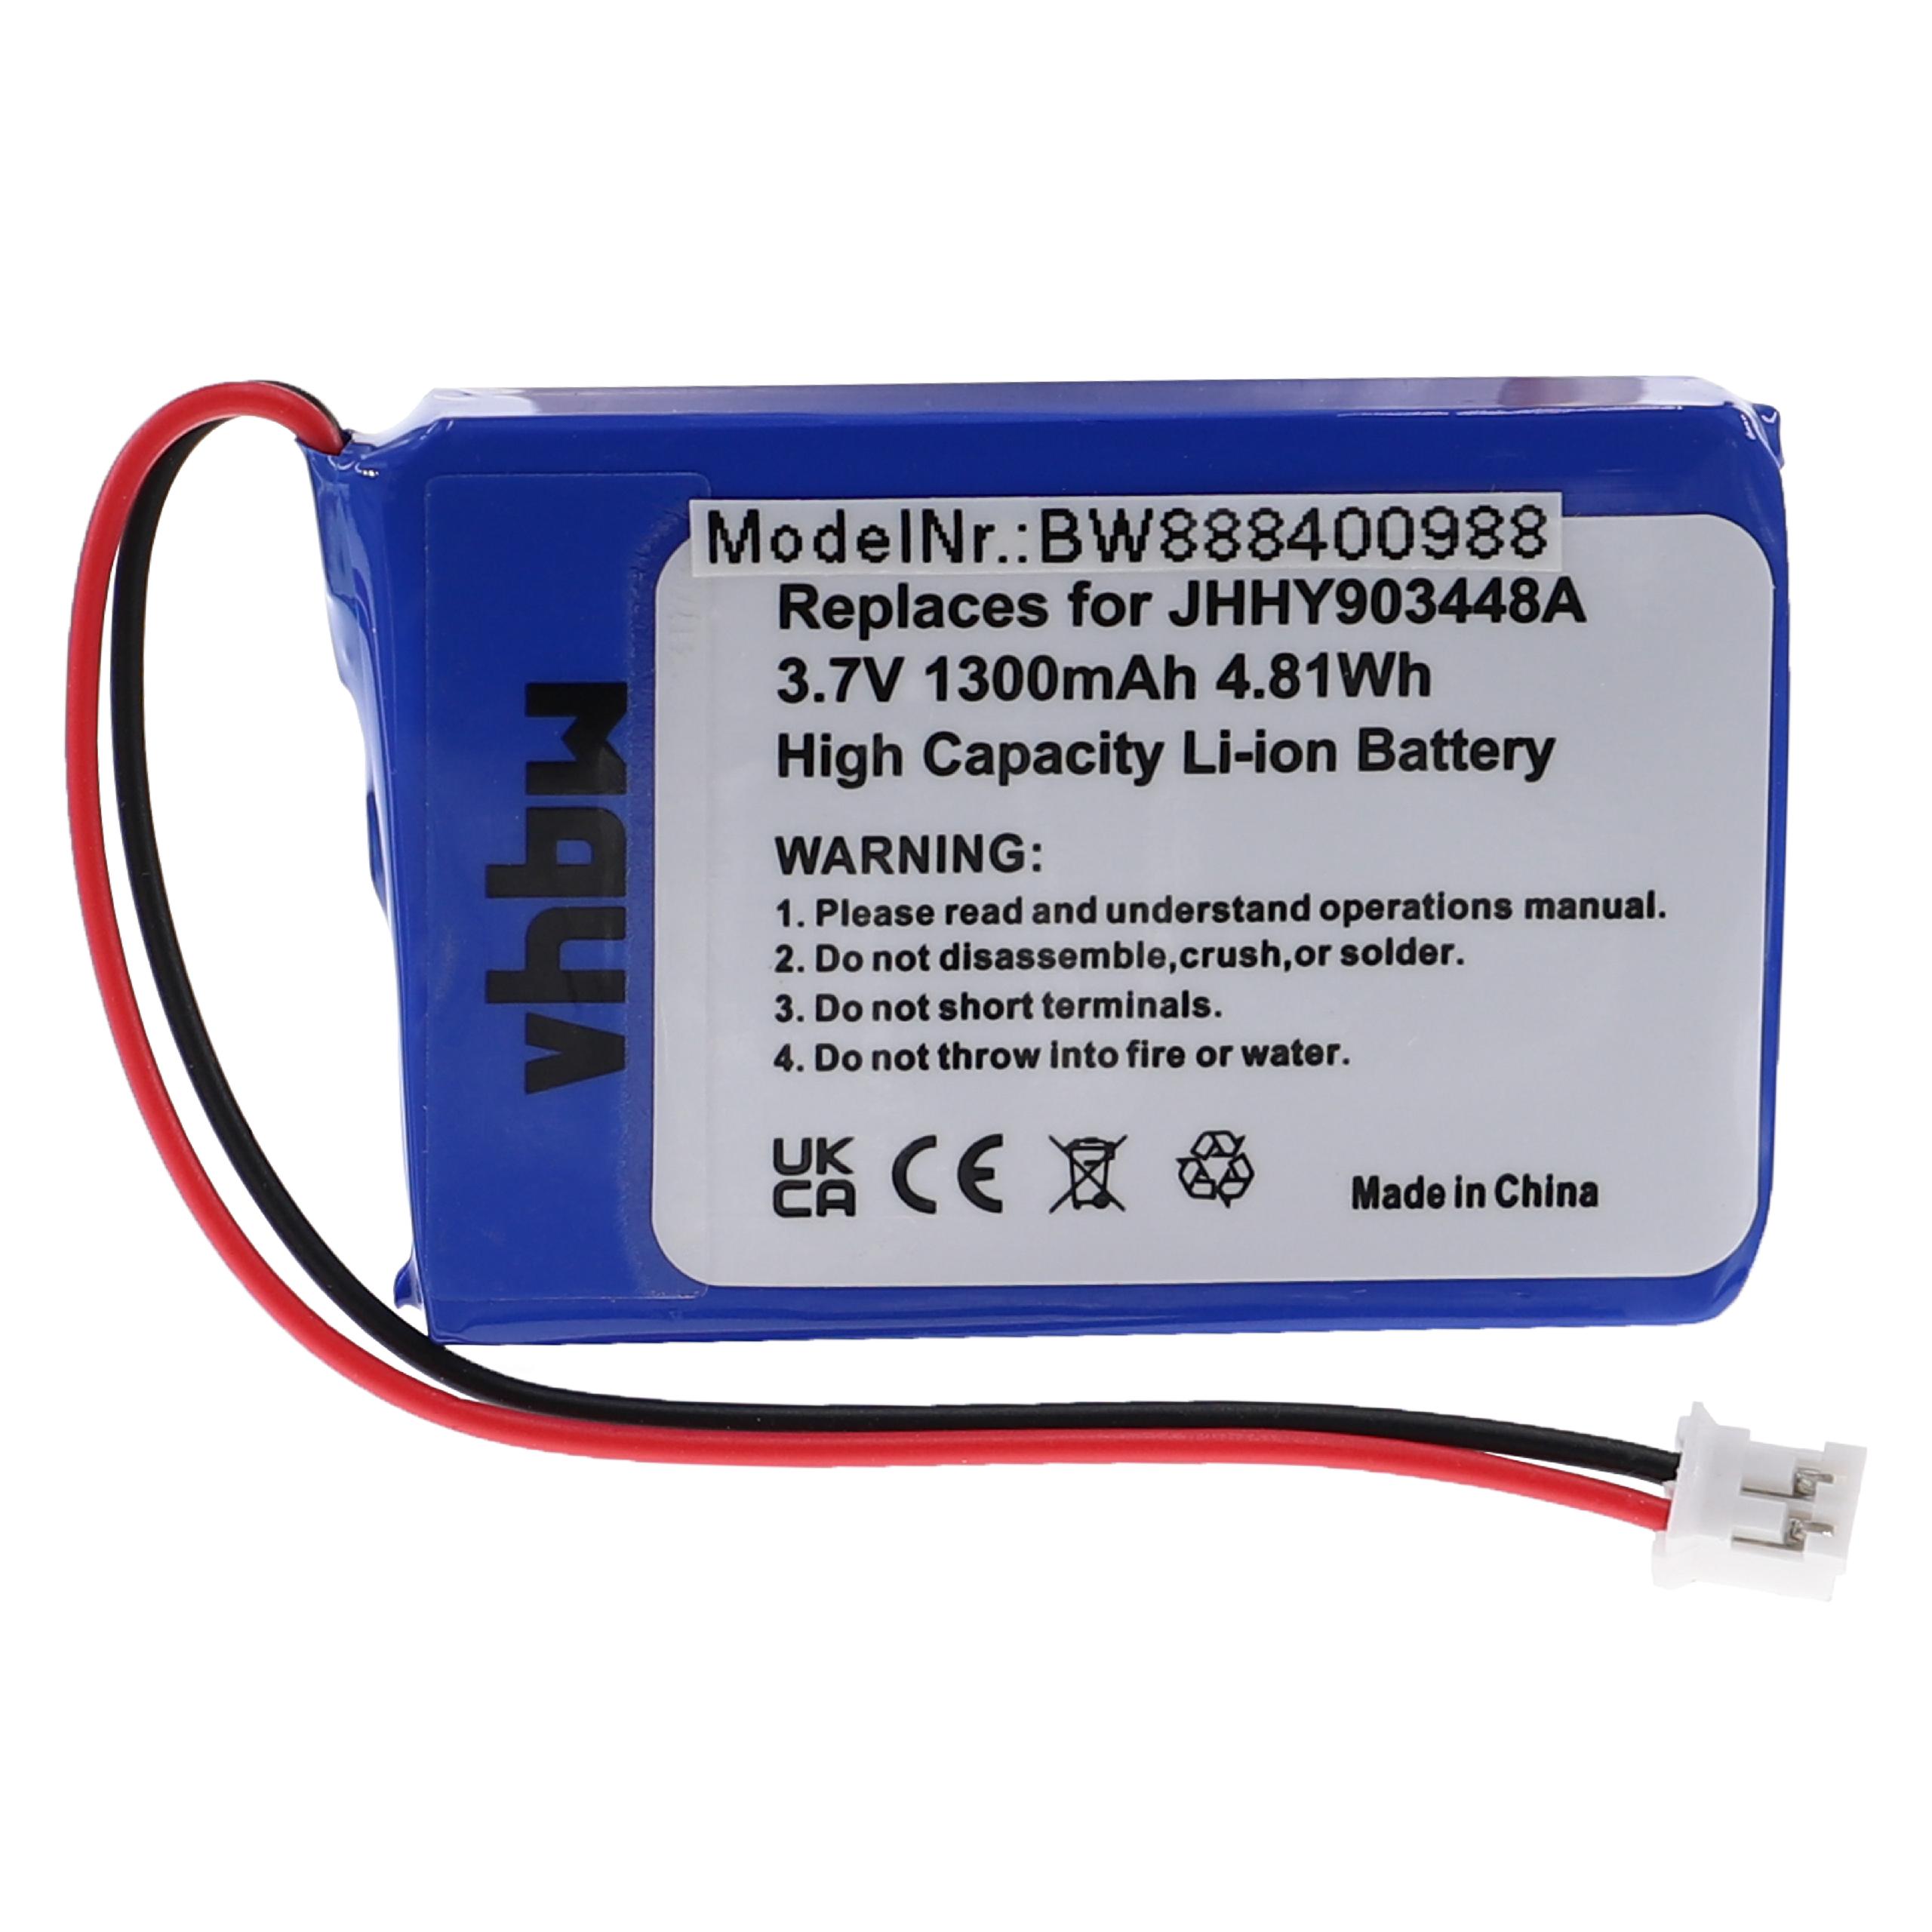 Radio Battery Replacement for Albrecht 083448, JHHY903448A - 1300mAh 3.7V Li-Ion